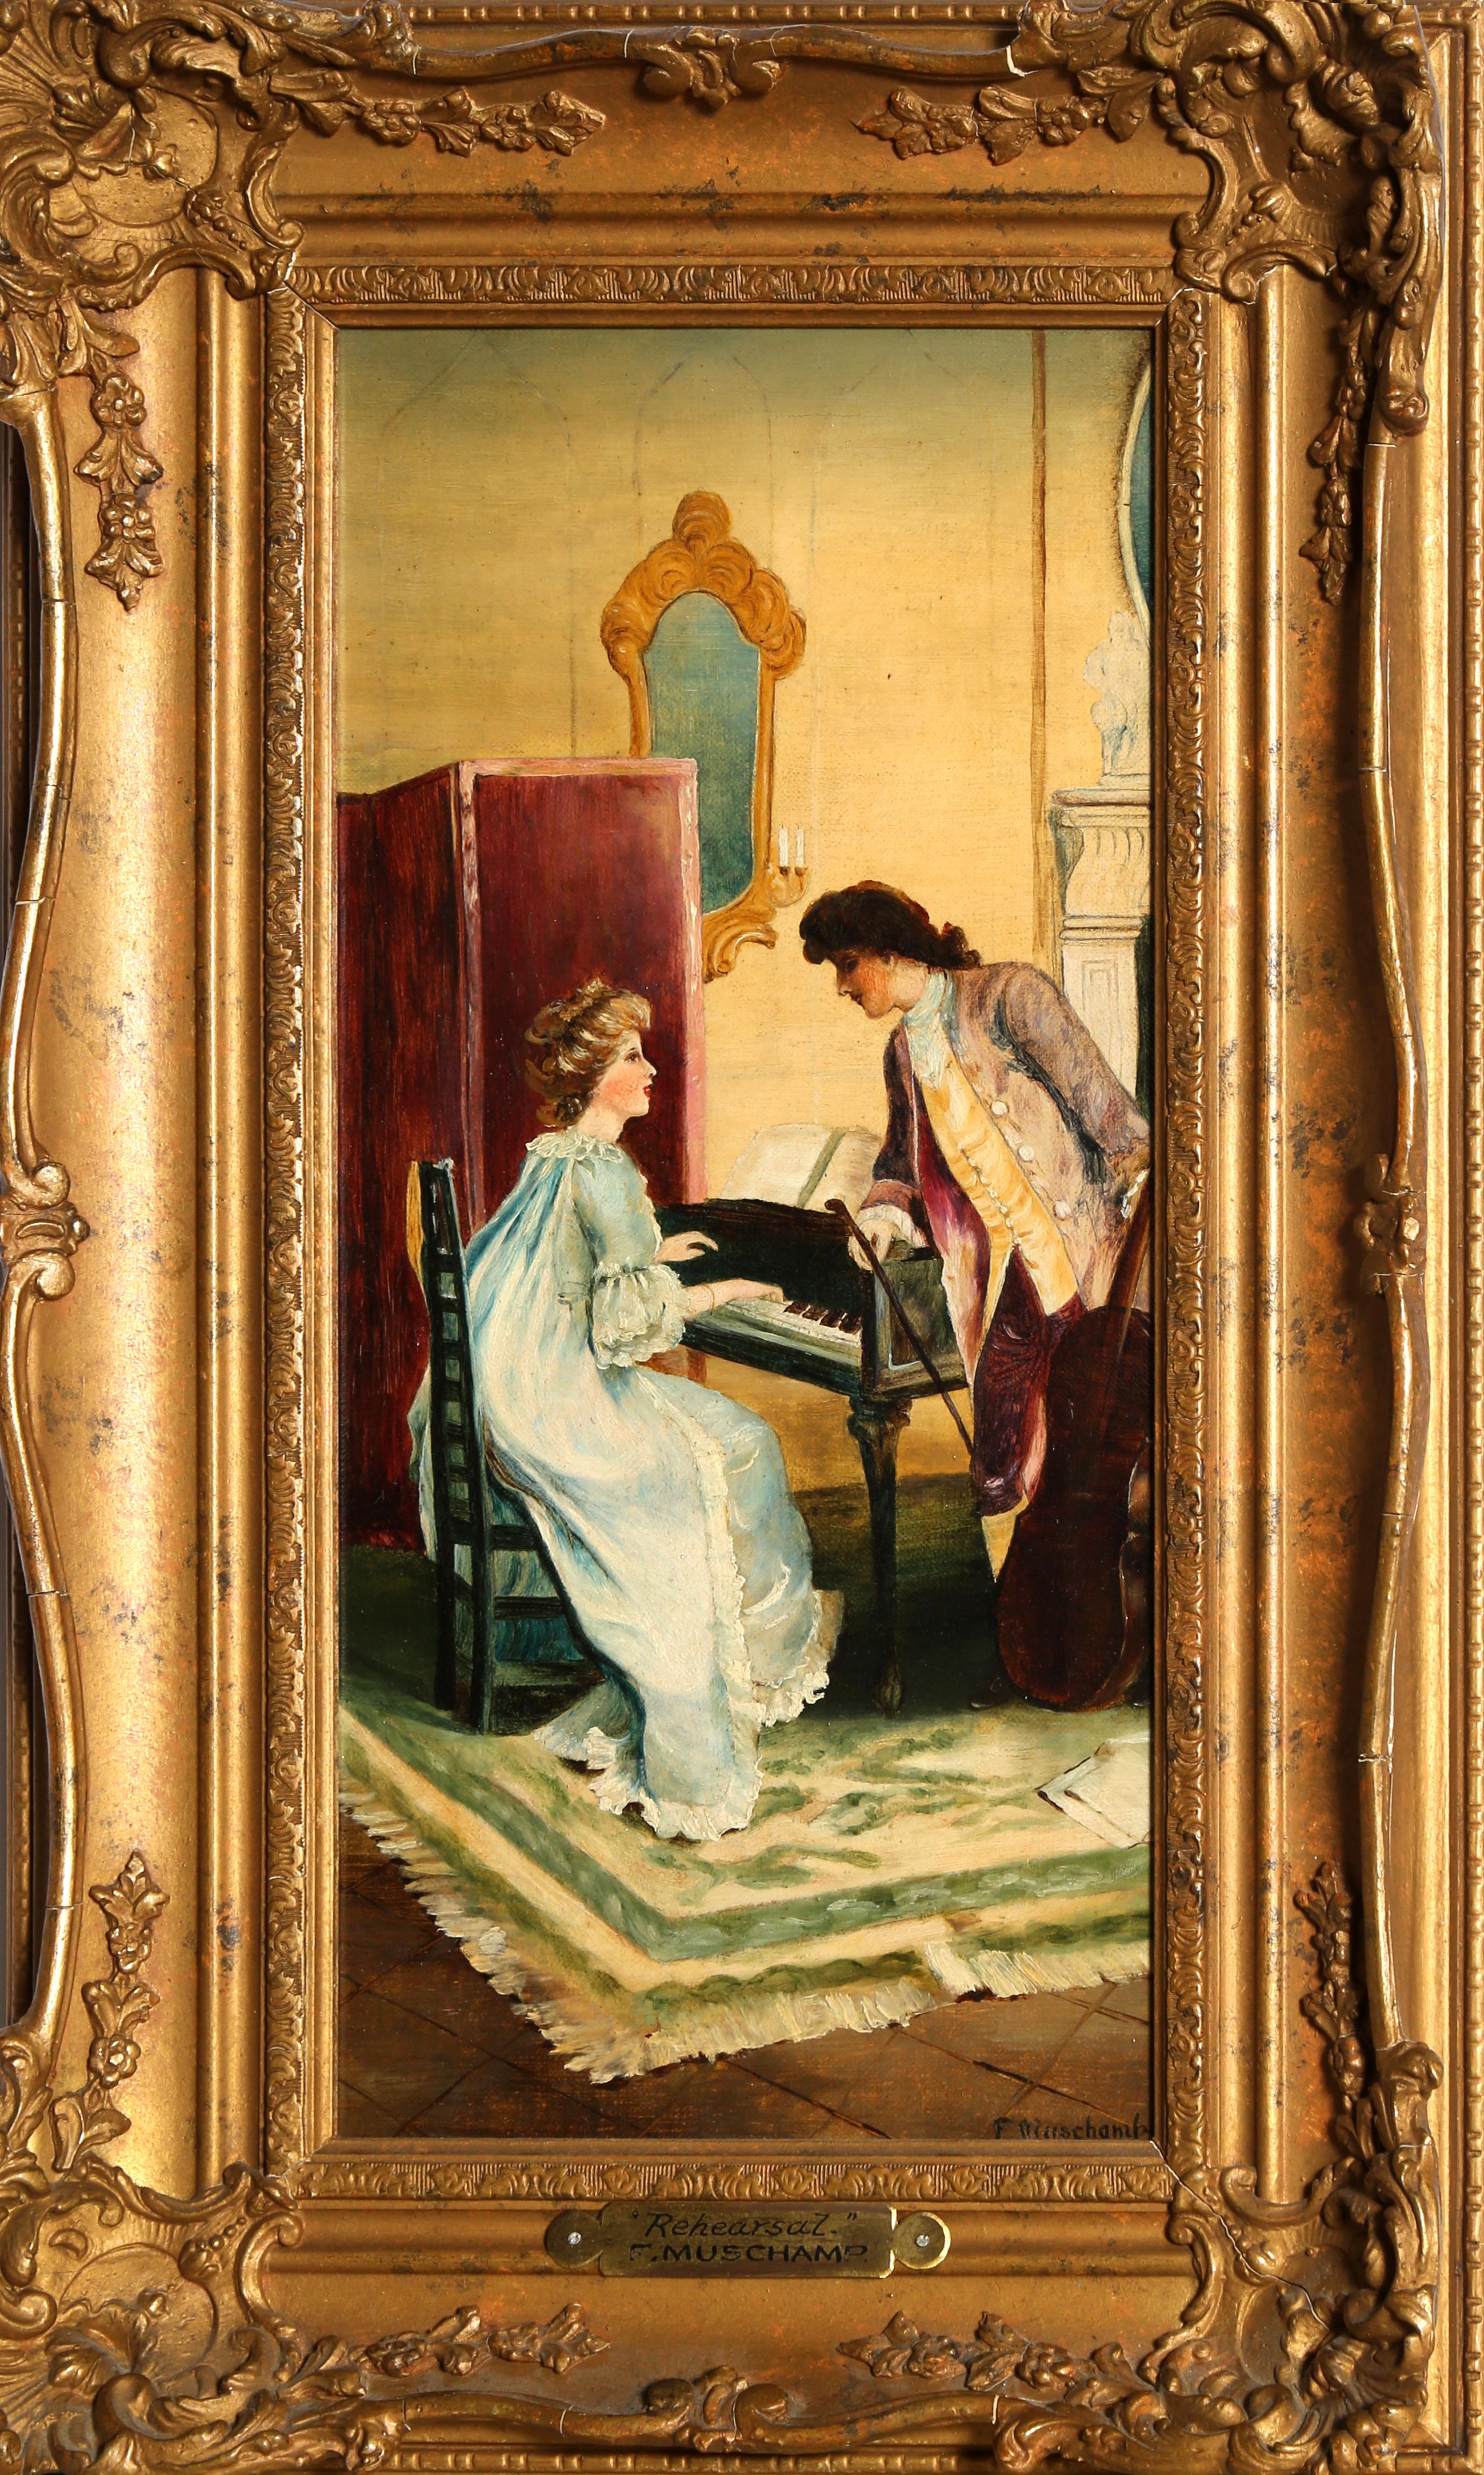 Rehearsal, Victorian Era painting by Francis Sydney Muschamp